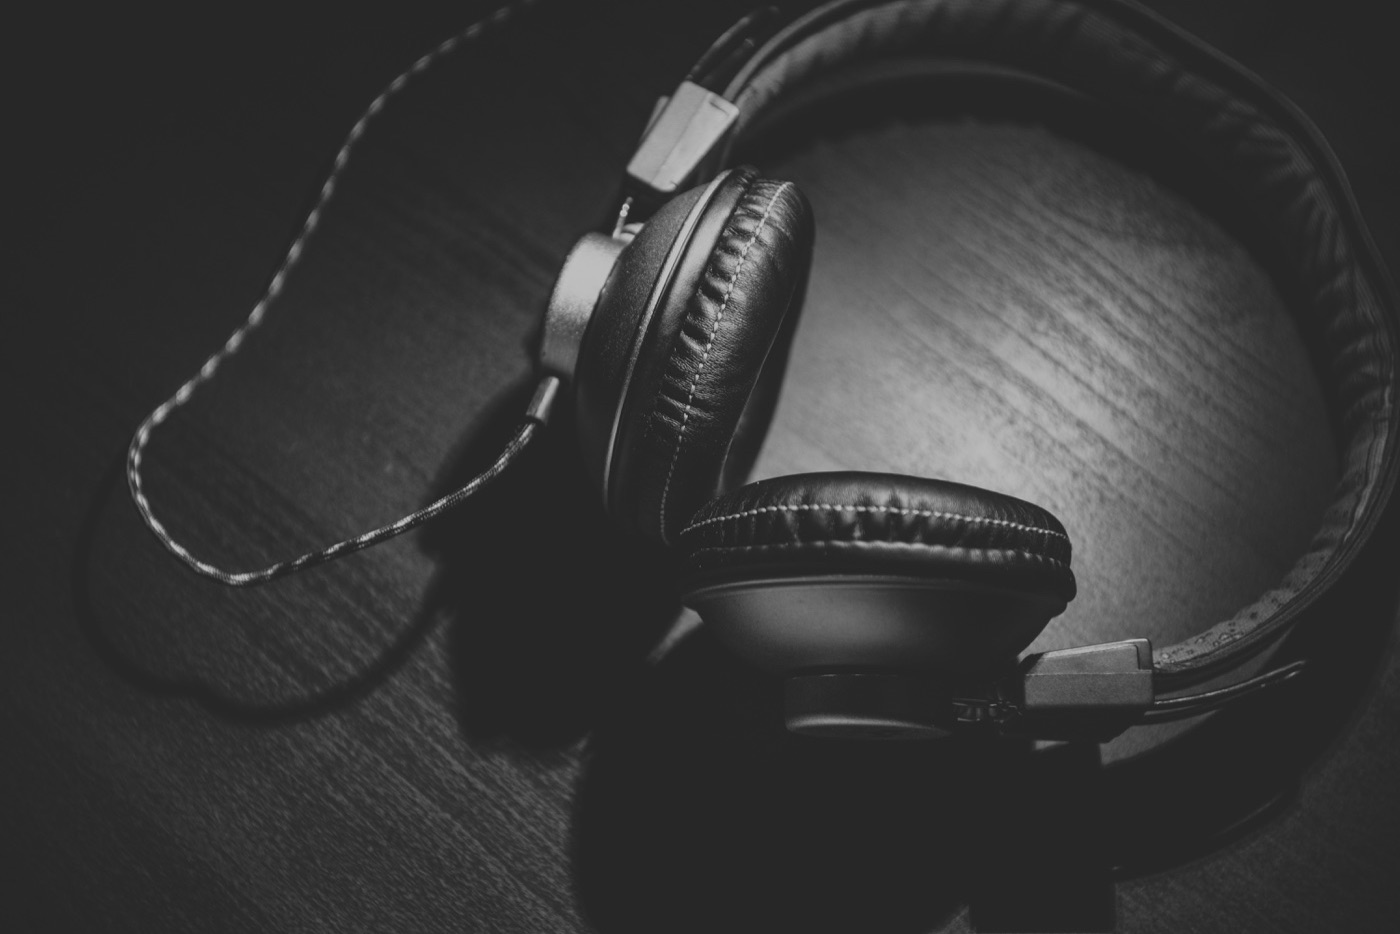 3 Podcasts worth listening to